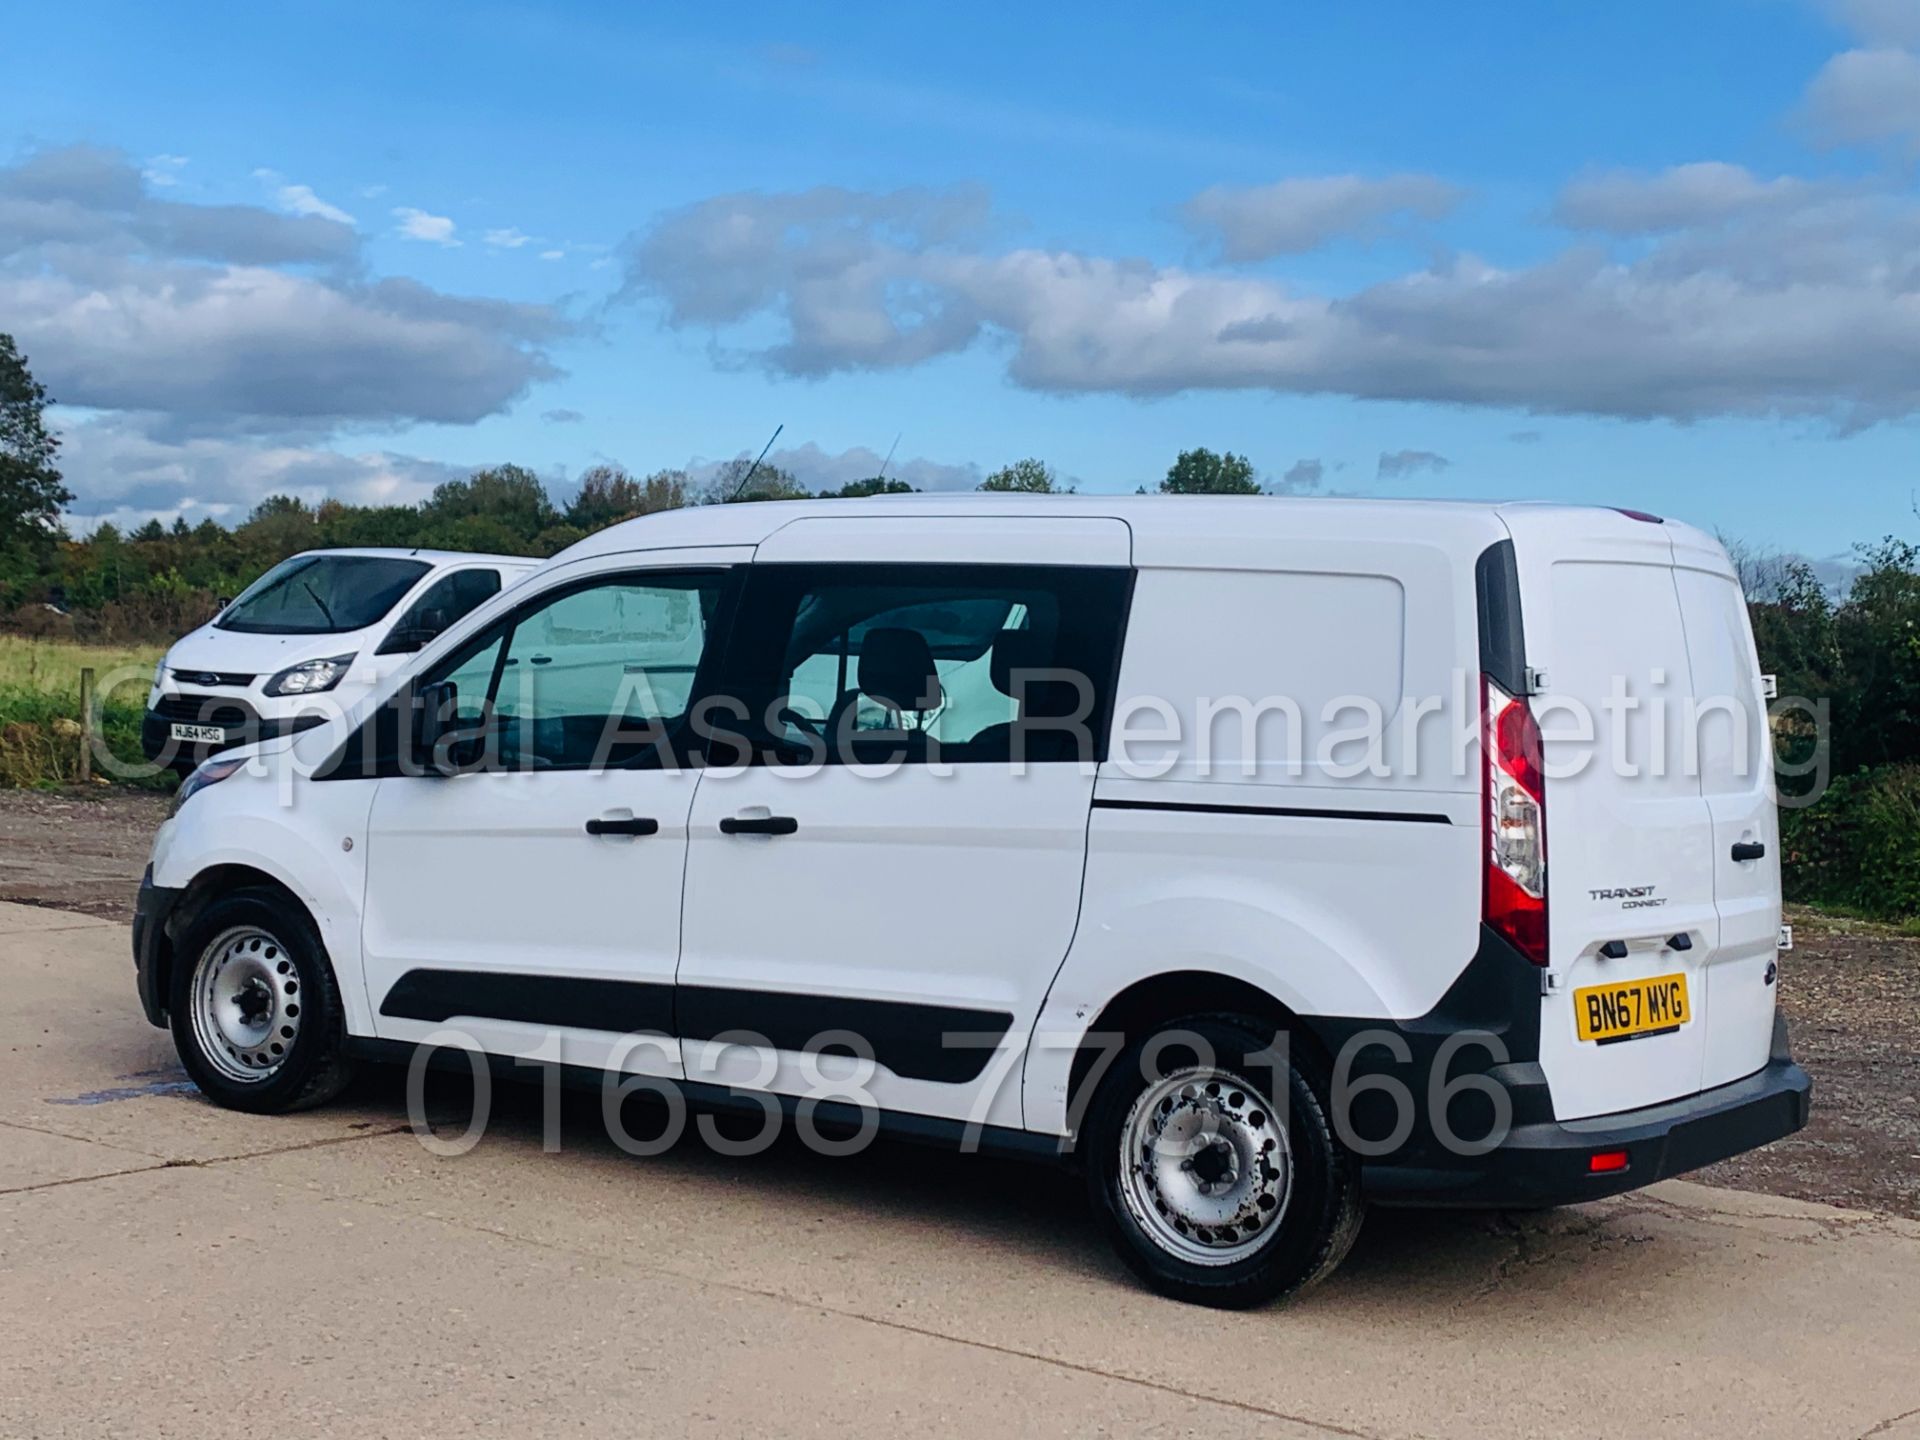 (On Sale) FORD TRANSIT CONNECT *LWB - 5 SEATER CREW VAN* (67 REG - EURO 6) 1.5 TDCI *A/C* (1 OWNER) - Image 8 of 40